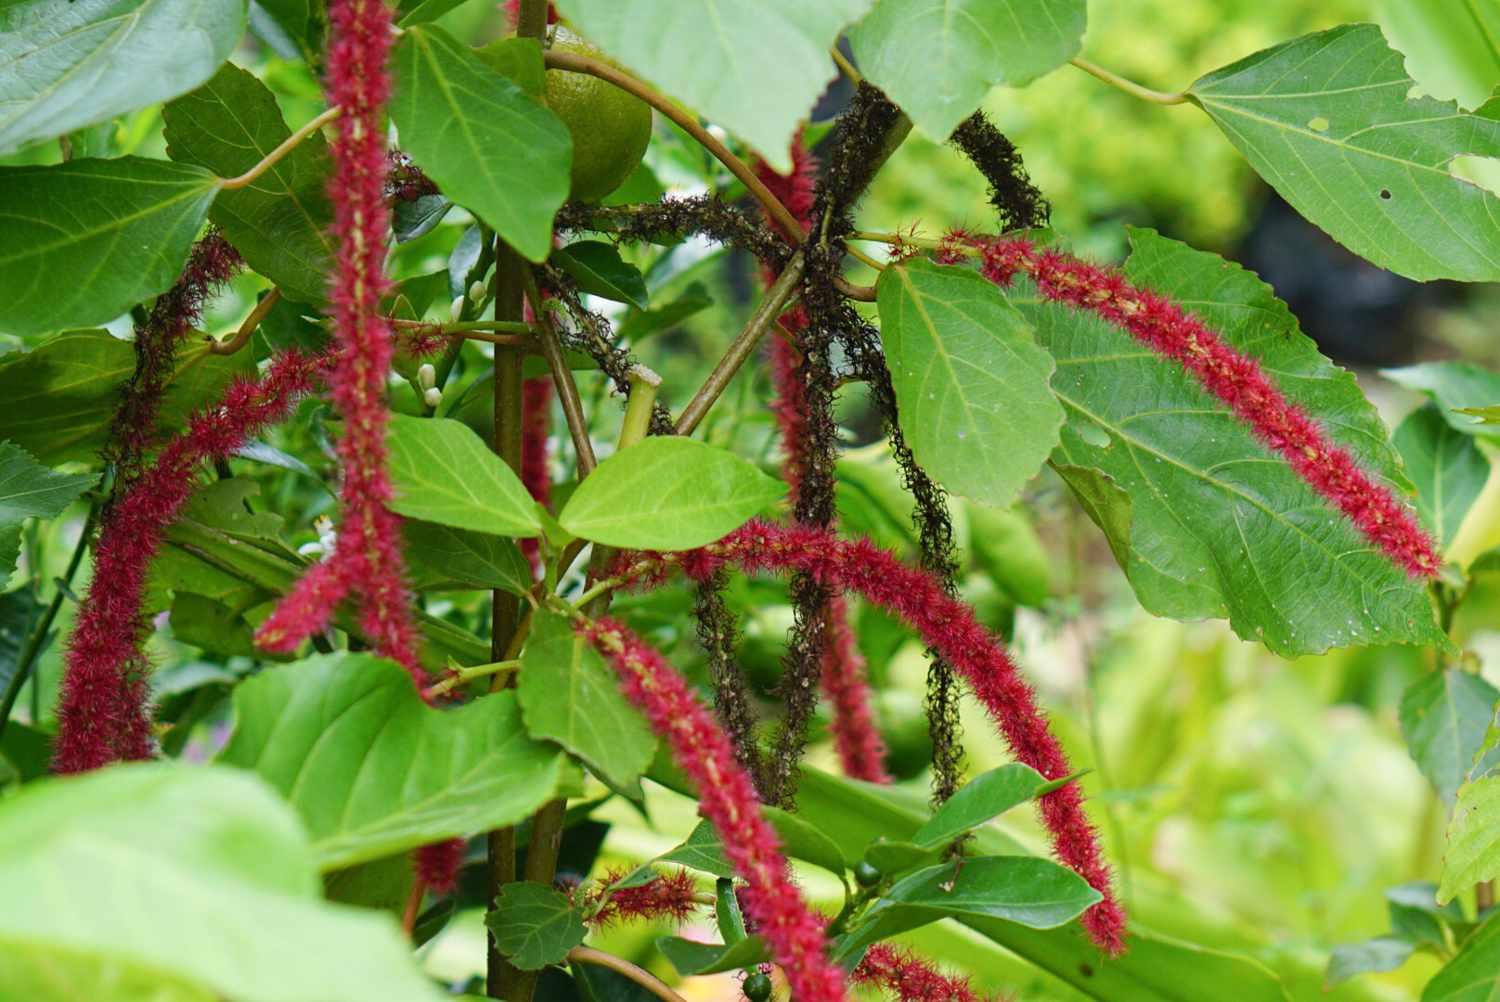 Acalypha plant with red bottle brush-like flowers hanging between large leaves